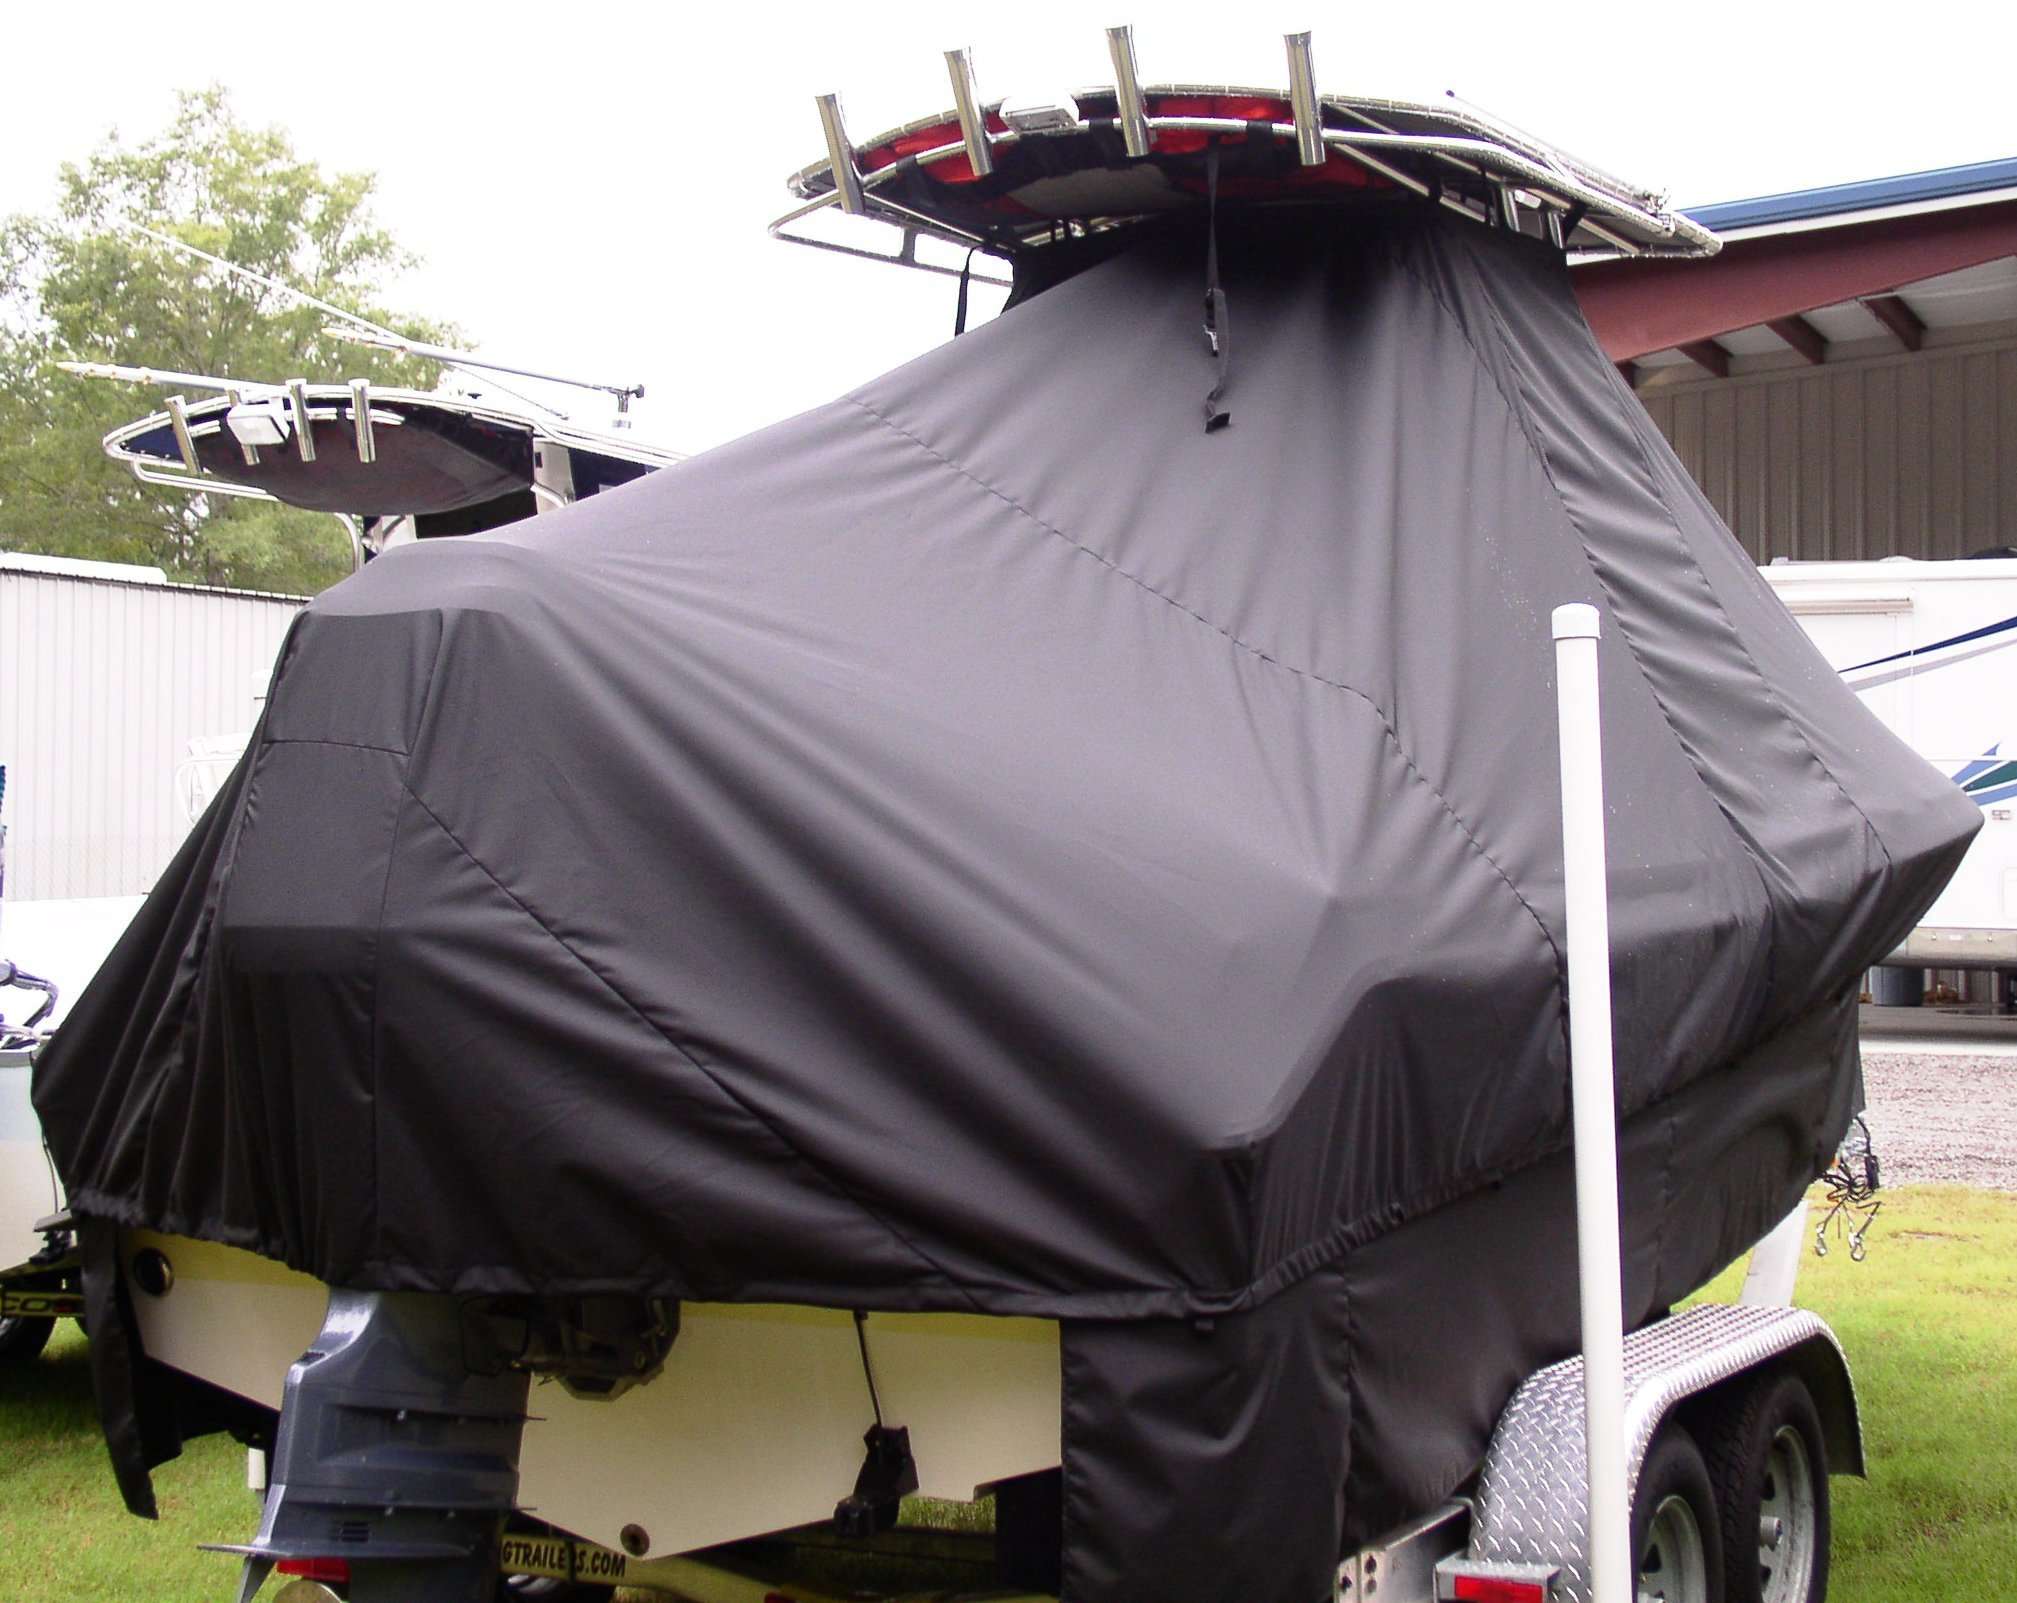 What boat covers are best for T